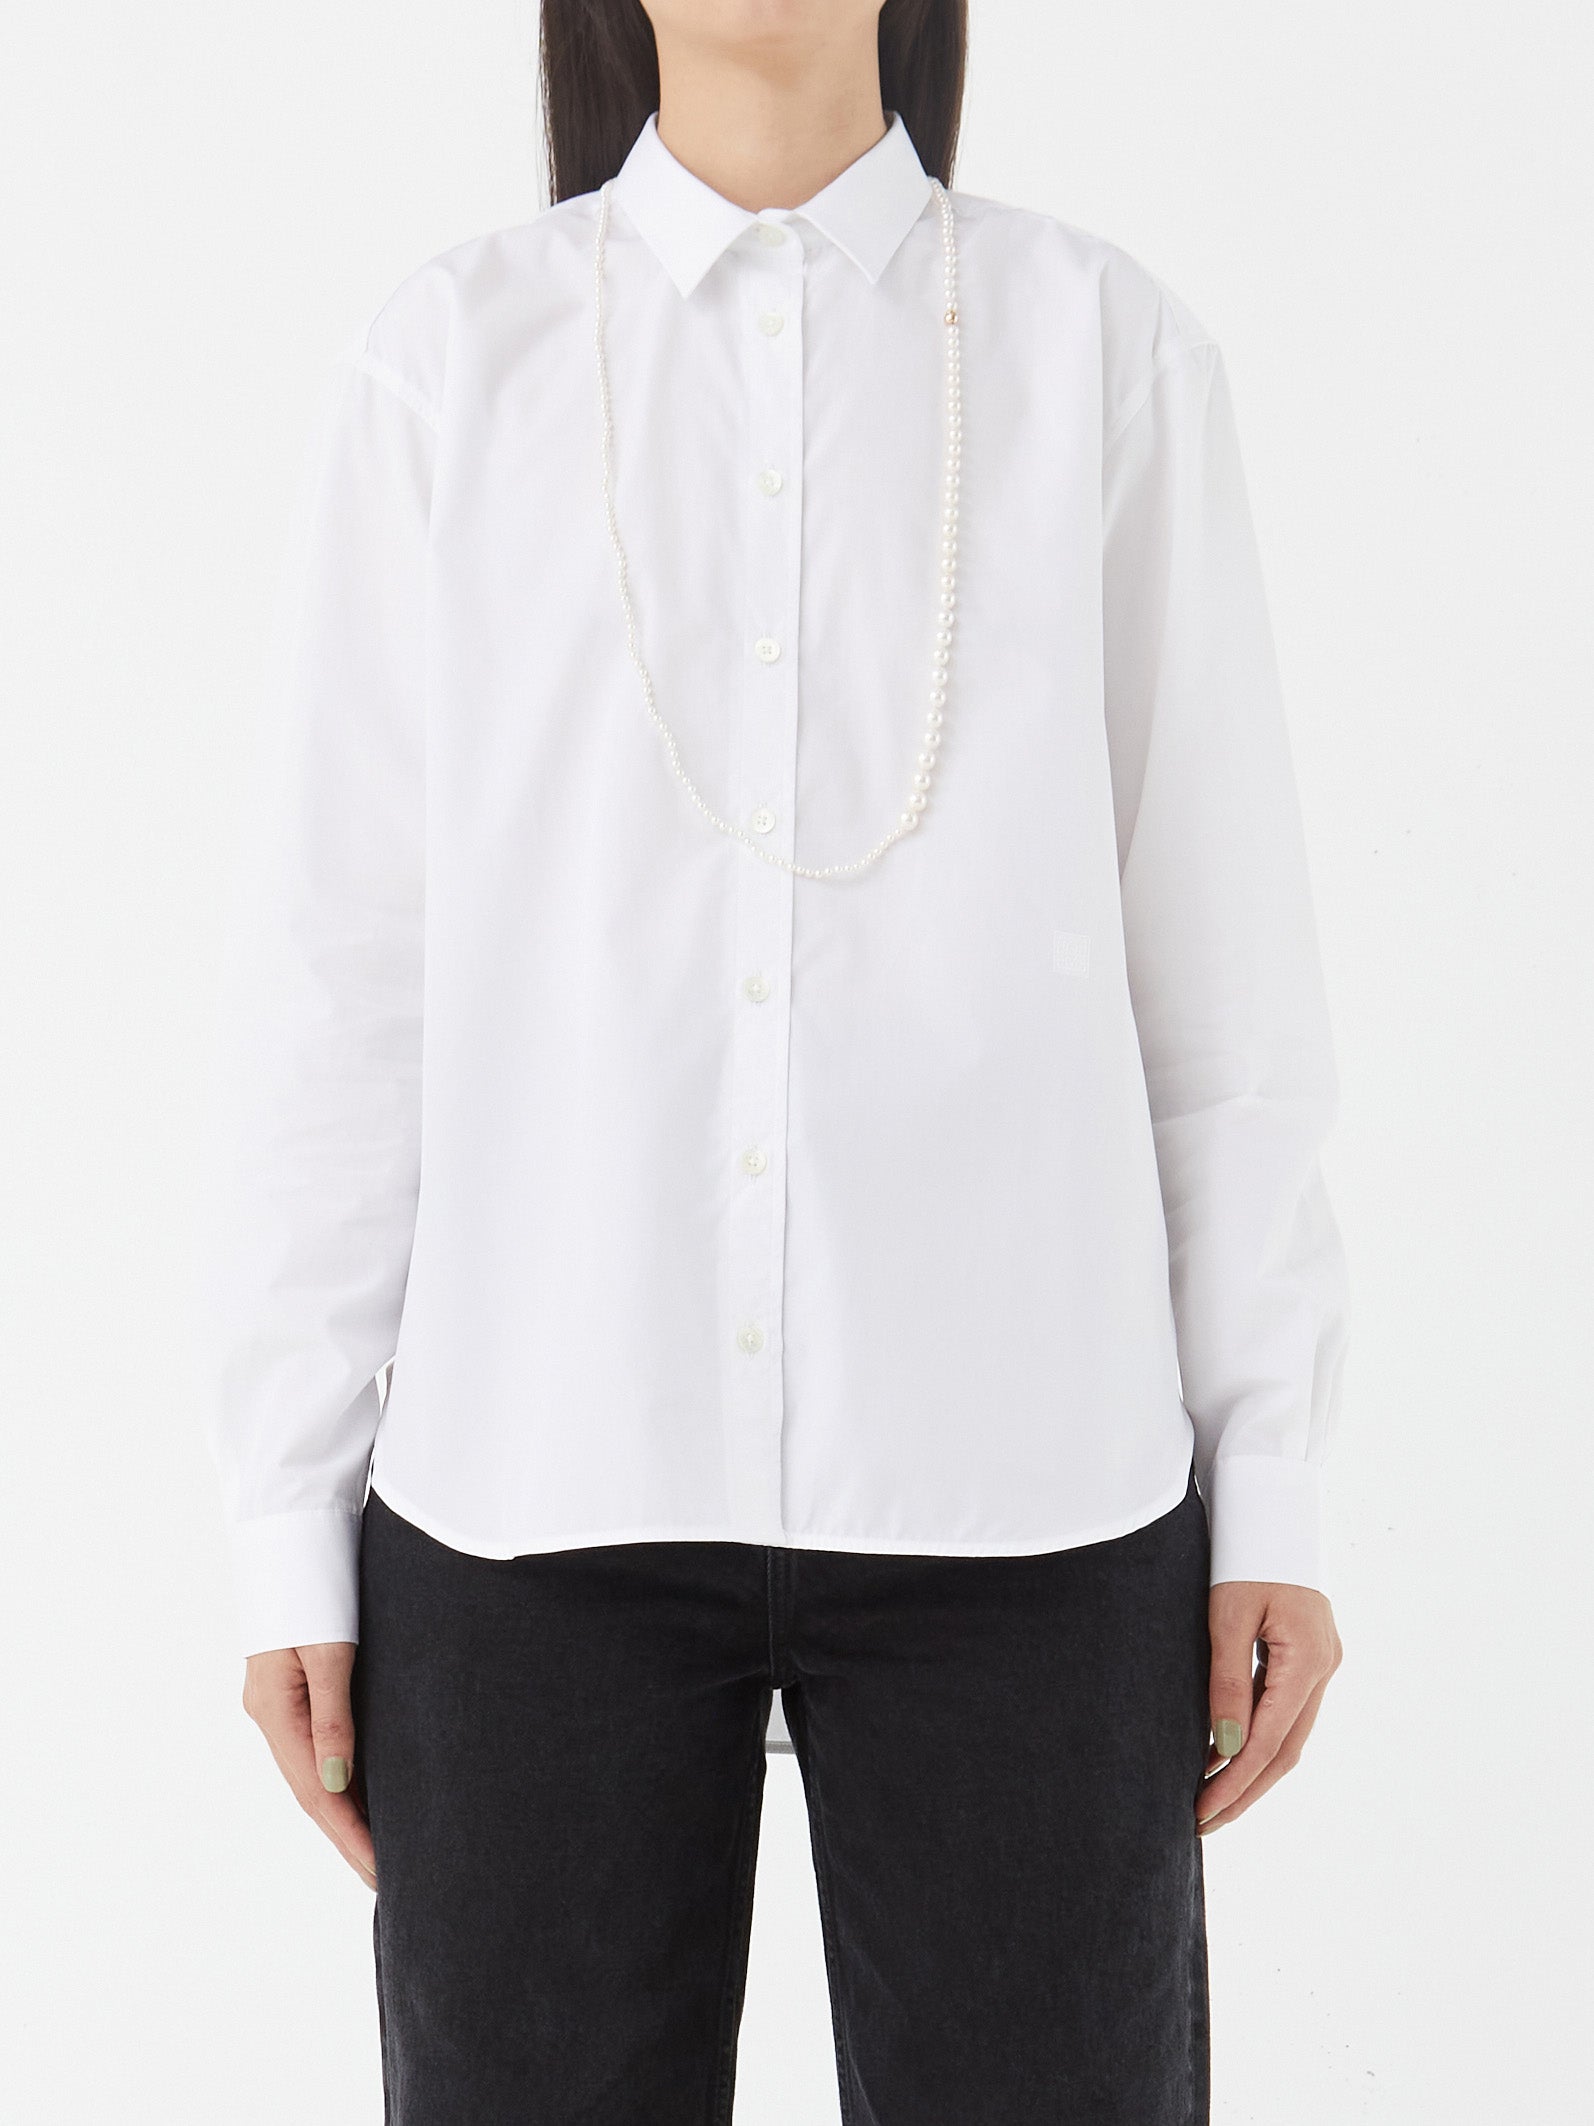 Totéme - Signature Cotton Shirt in White